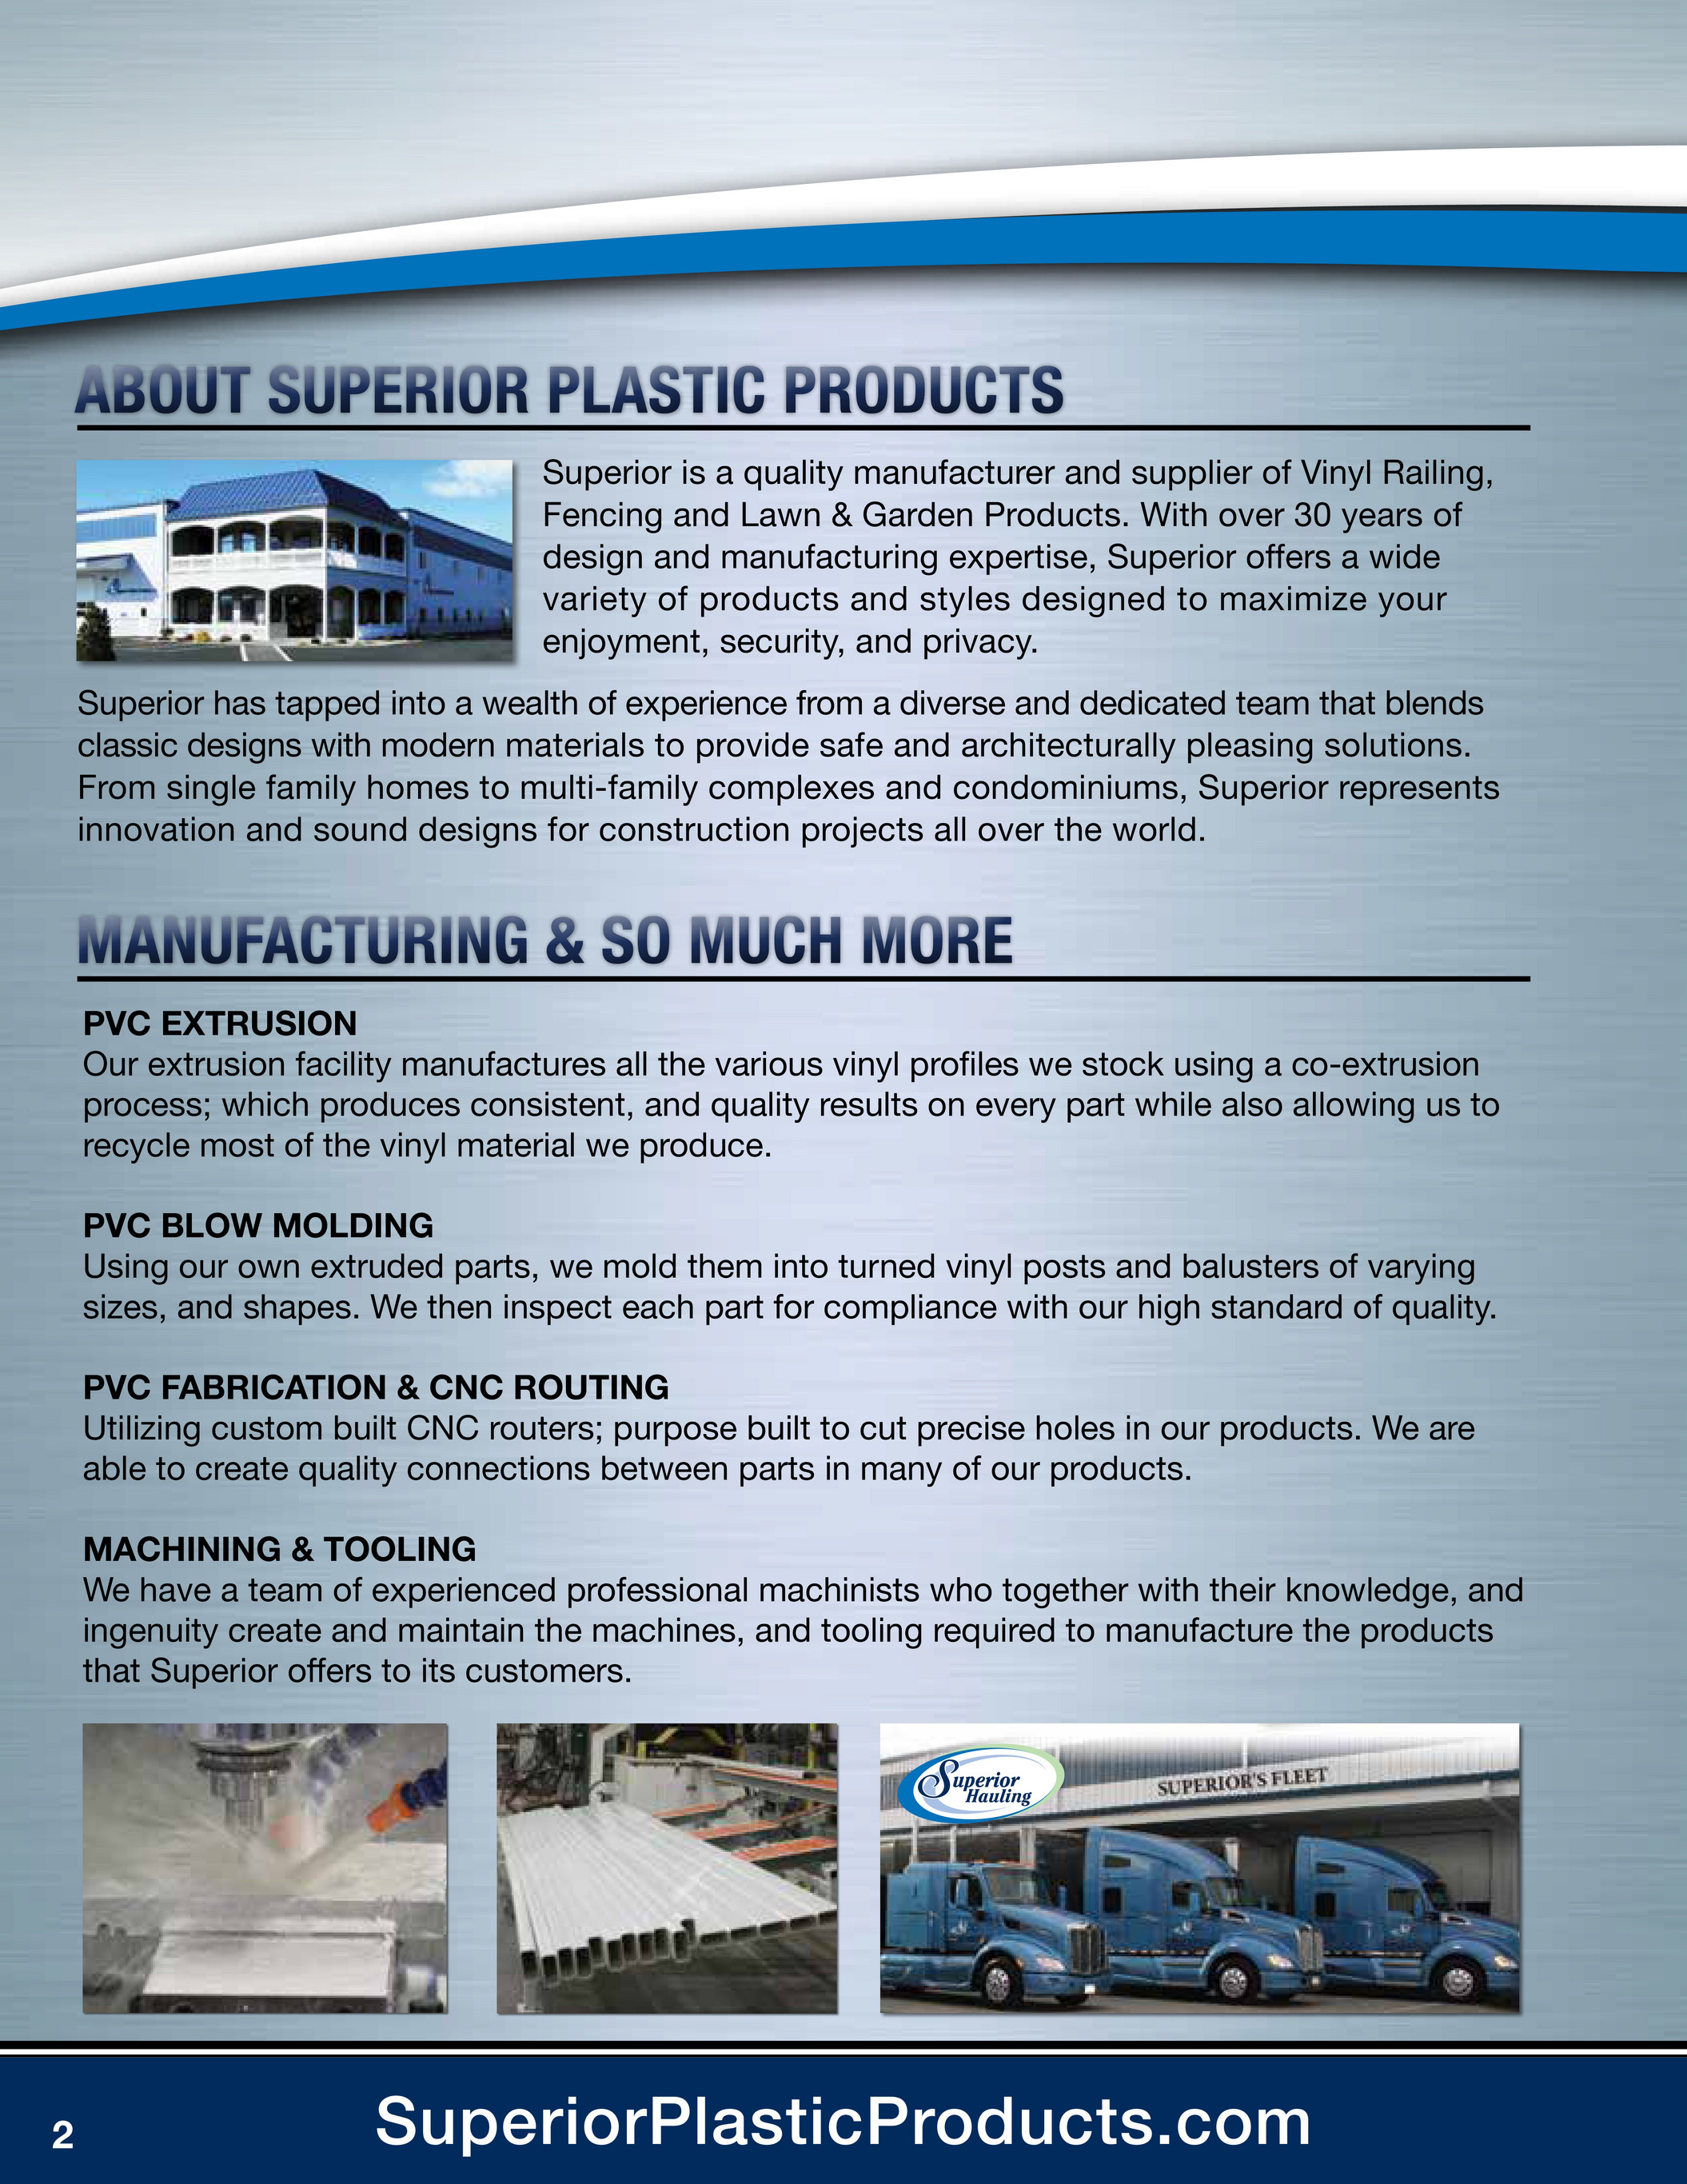 Superior Plastic Products - Quality Vinyl Railing, Fencing, & Much More